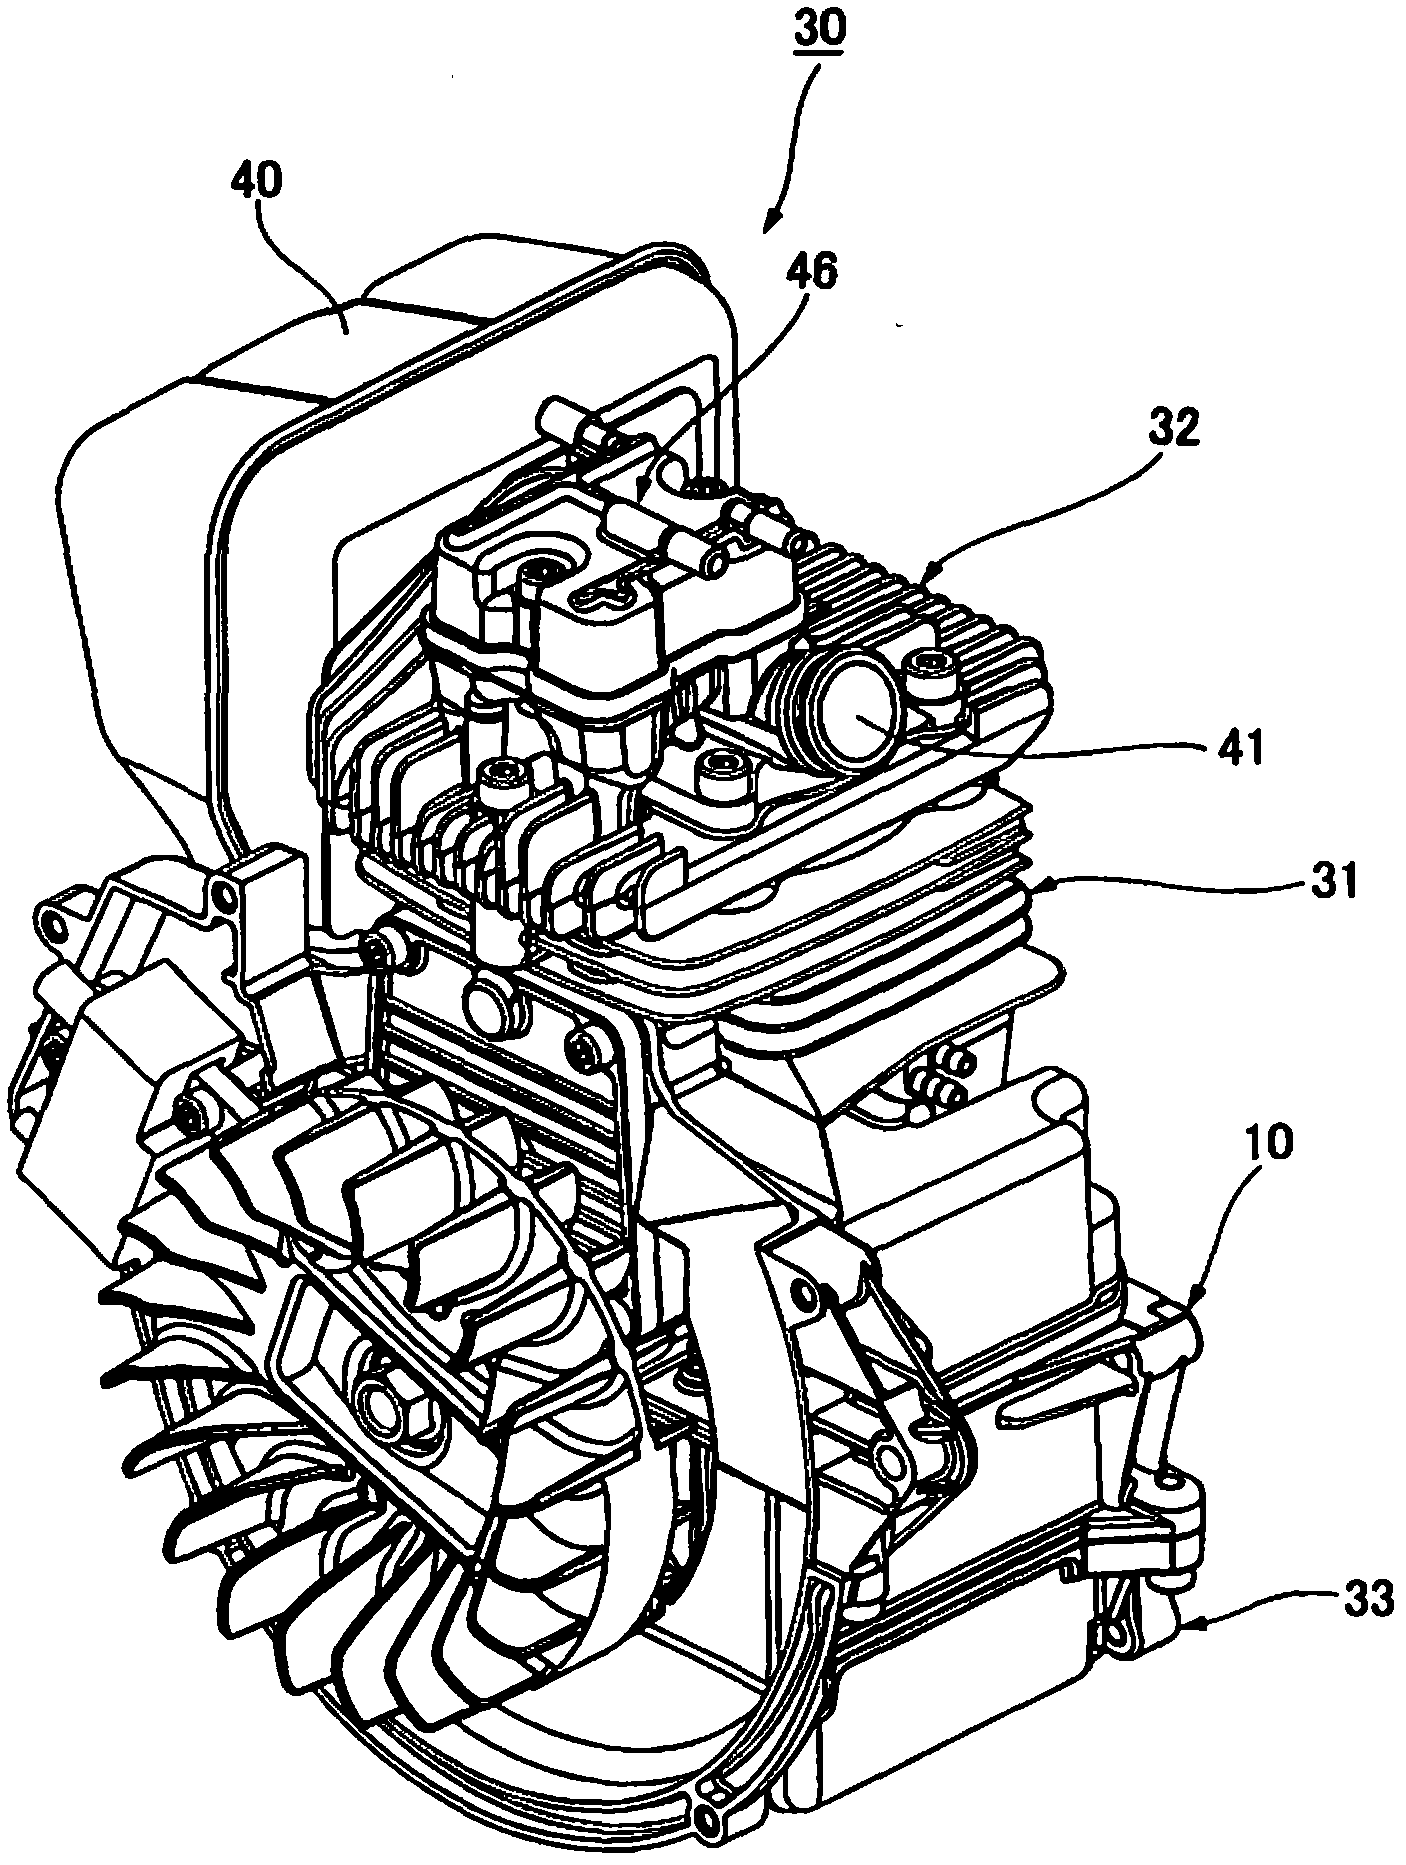 Lubrication structure for four-stroke engine